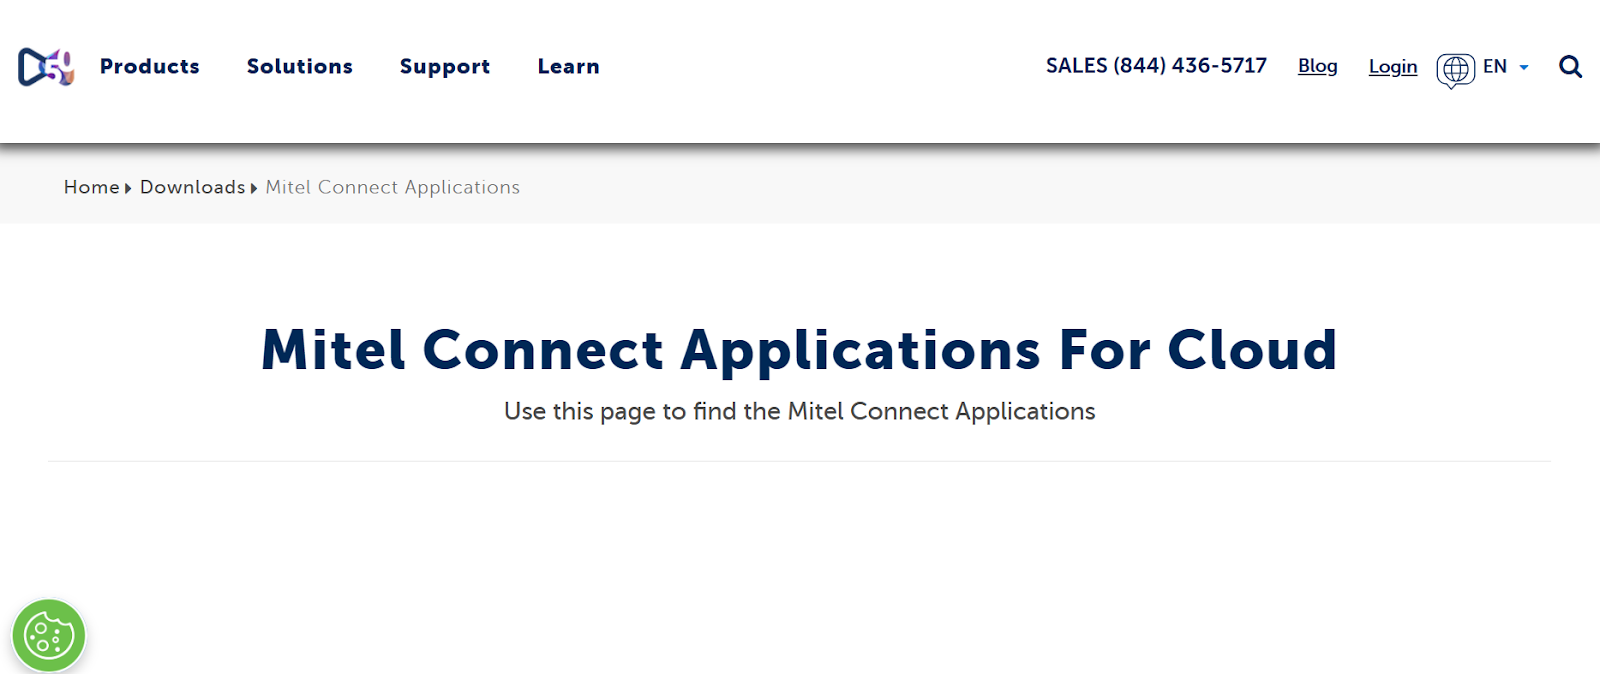 Mitel website snapshot highlighting the services it provides.